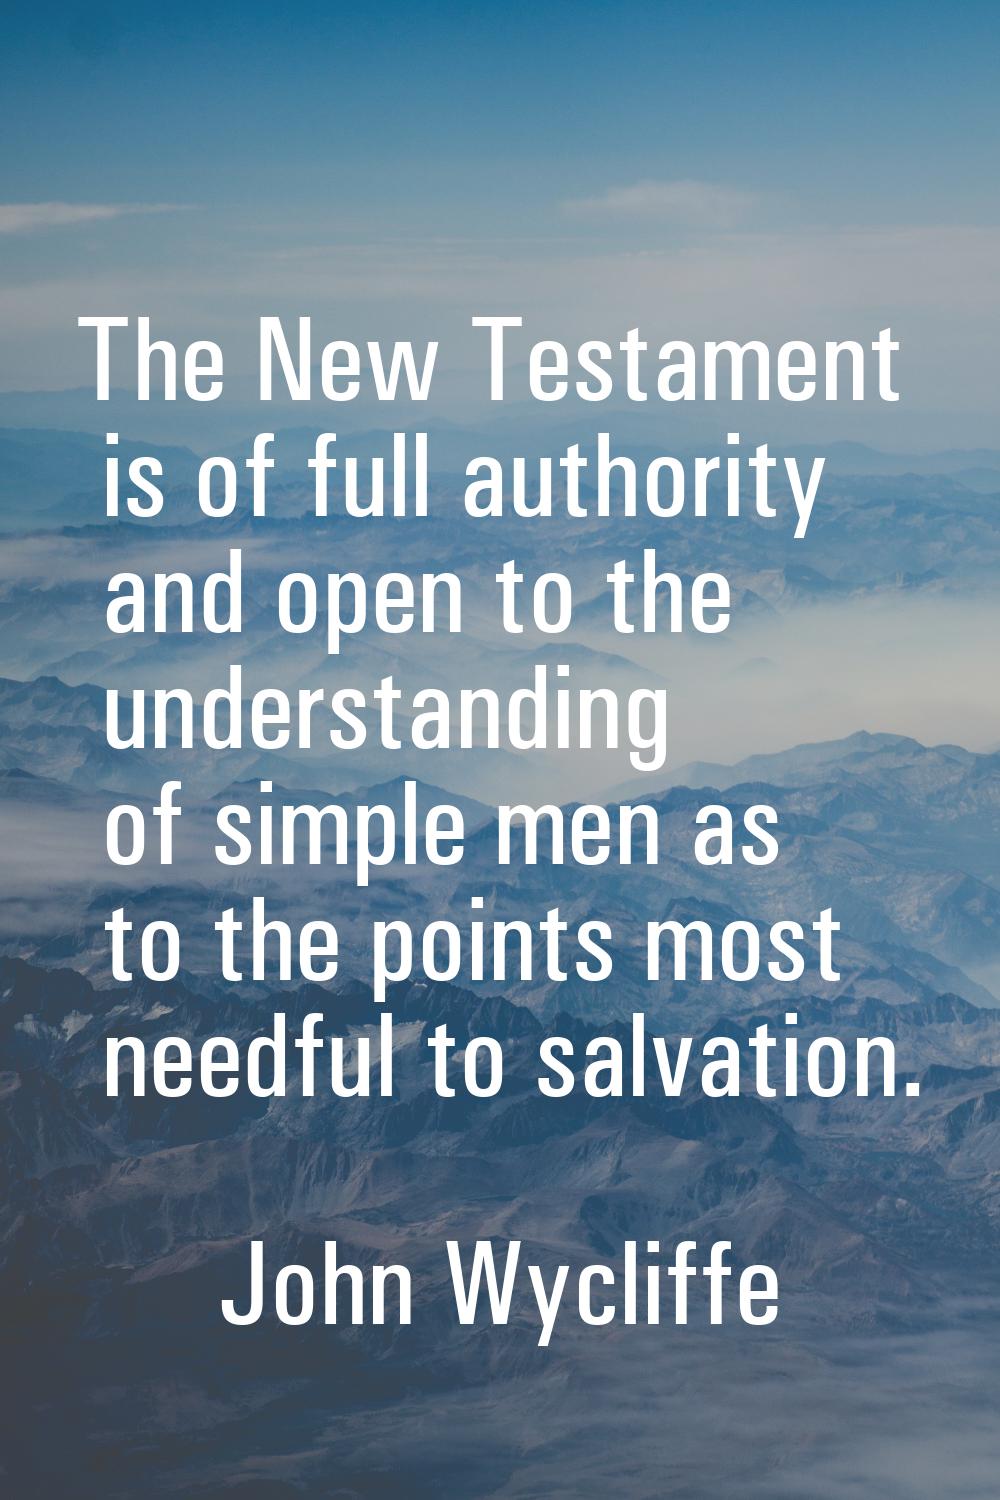 The New Testament is of full authority and open to the understanding of simple men as to the points